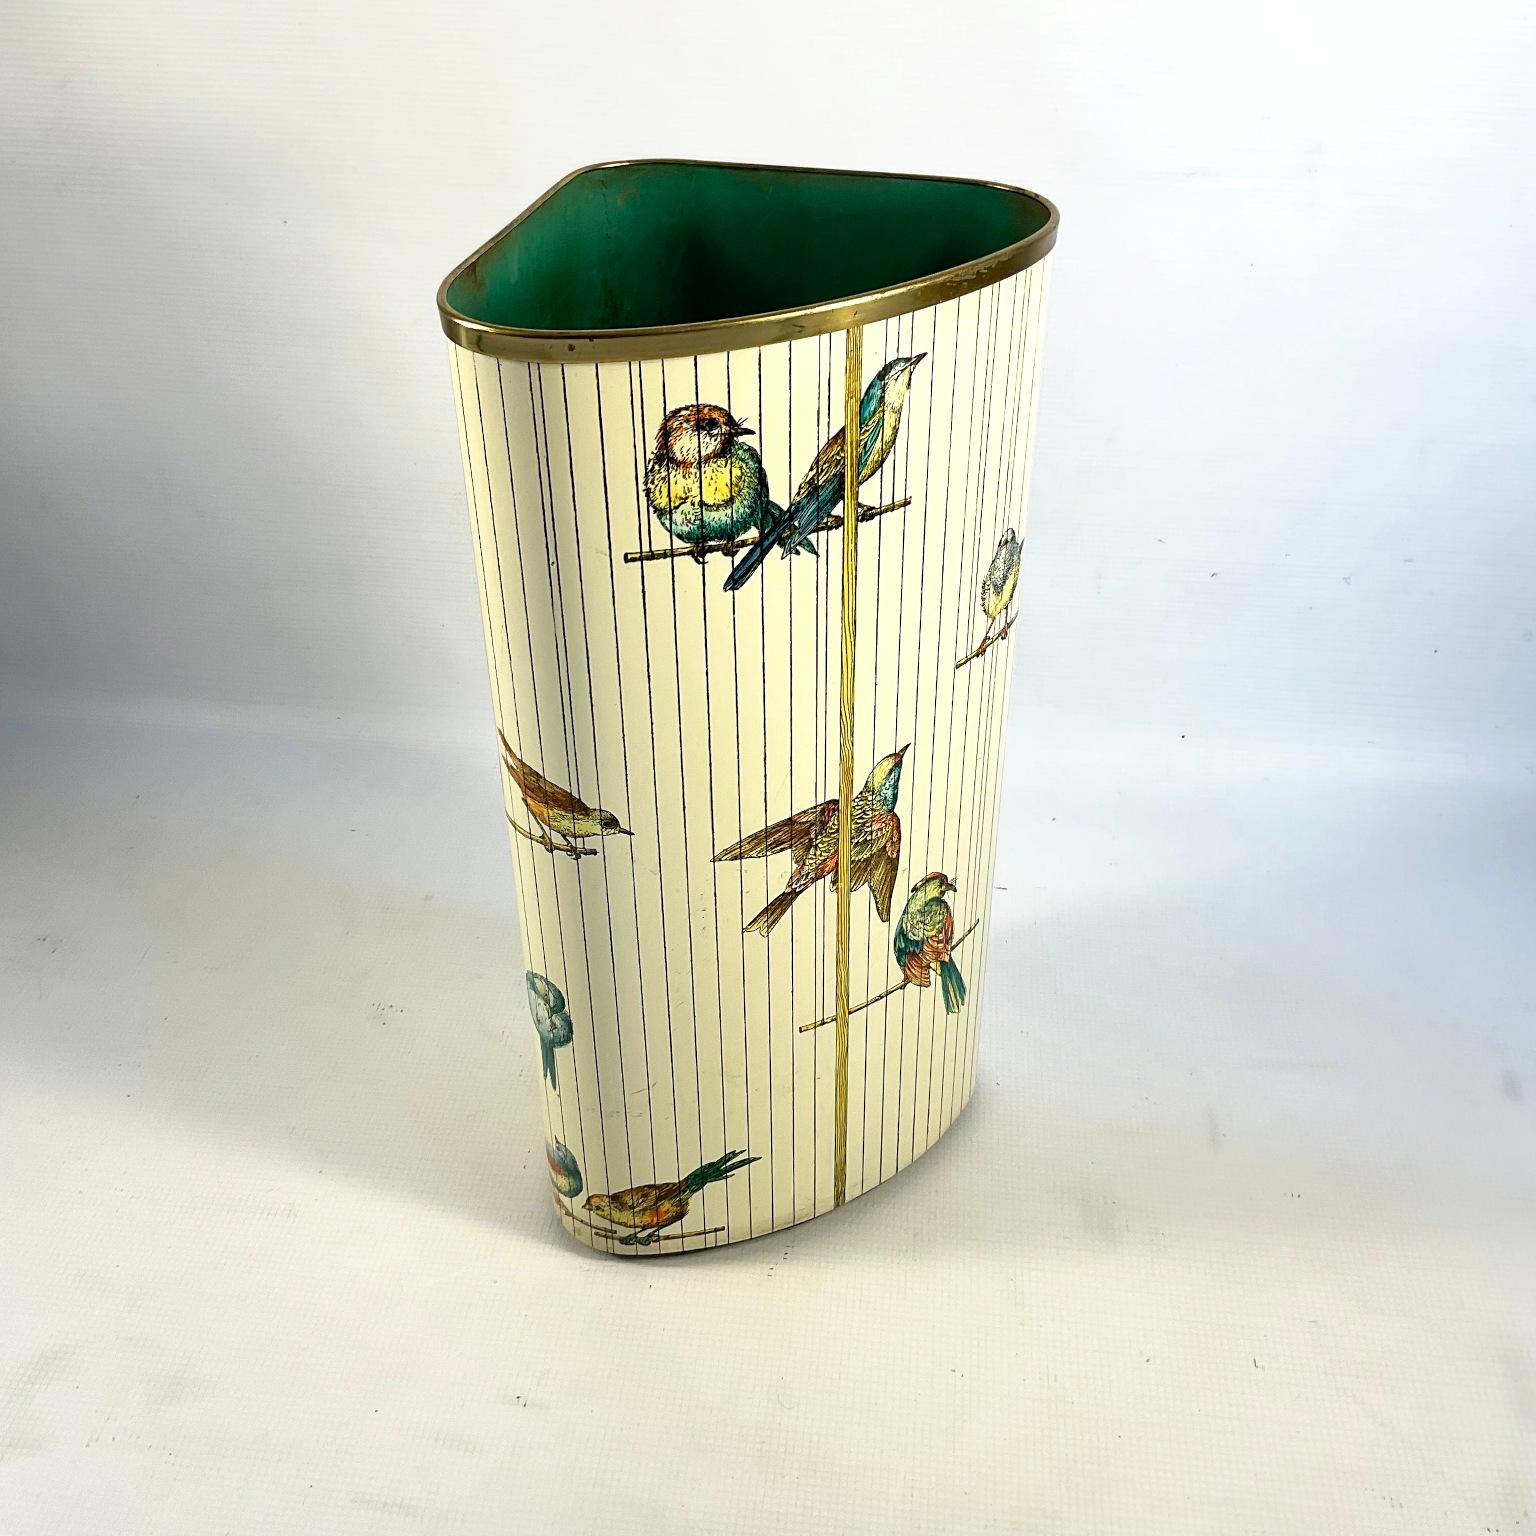 1950s corner umbrella stand by Felice Galbiati. Enamel painting on metal decorated by hand with colorful birds. In a style reminiscent of Piero Fornasetti with a brass trim finish and lime green paint on the inside.
Stamped underneath 